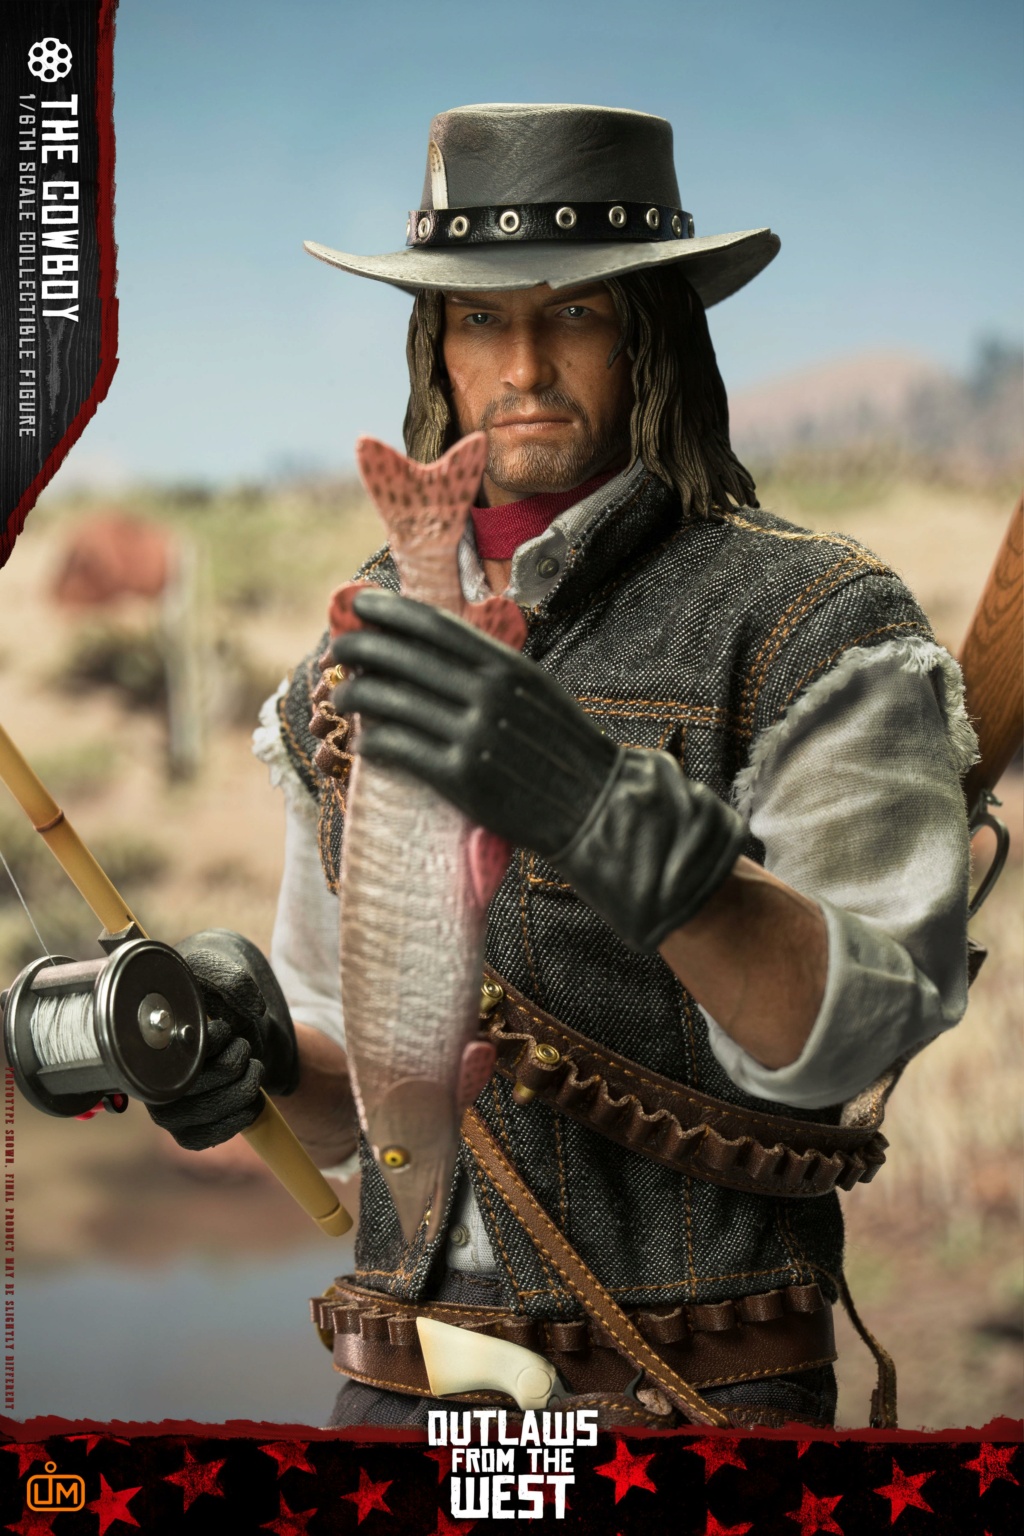 TheCowboy - NEW PRODUCT: LIM TOYS: Outlaws of the West Series: The Cowboy 1/6 scale action figure 41695010